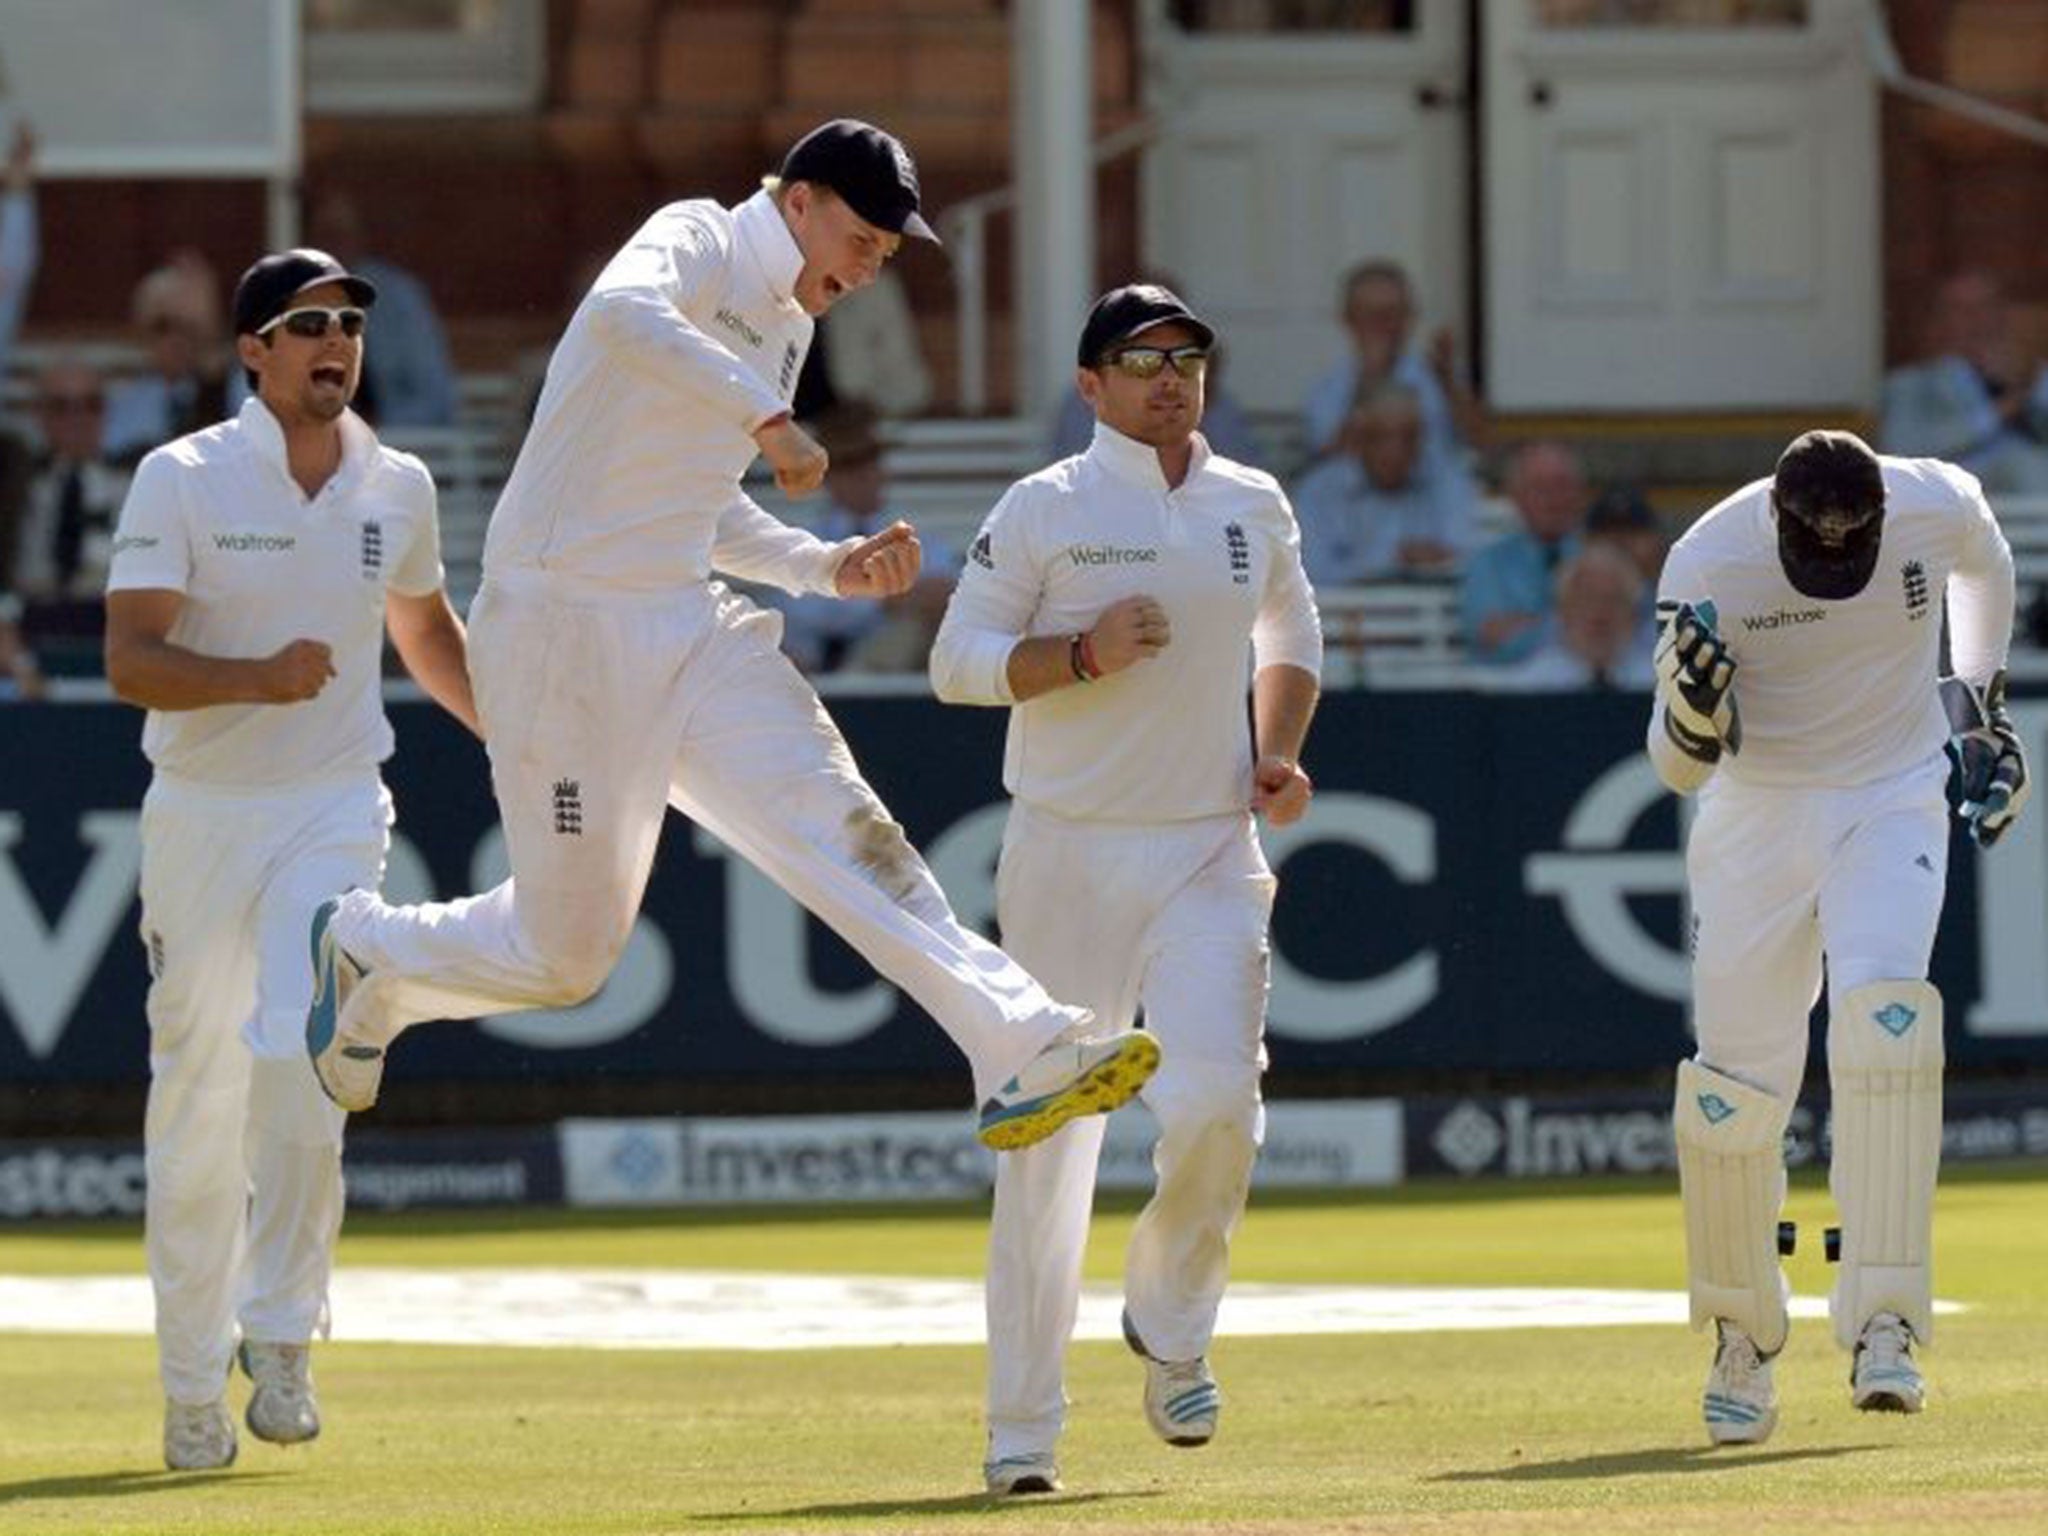 Cook, Joe Root and Ian Bell celebrate after Matt Prior took the catch of India's Cheteshwar Pujara